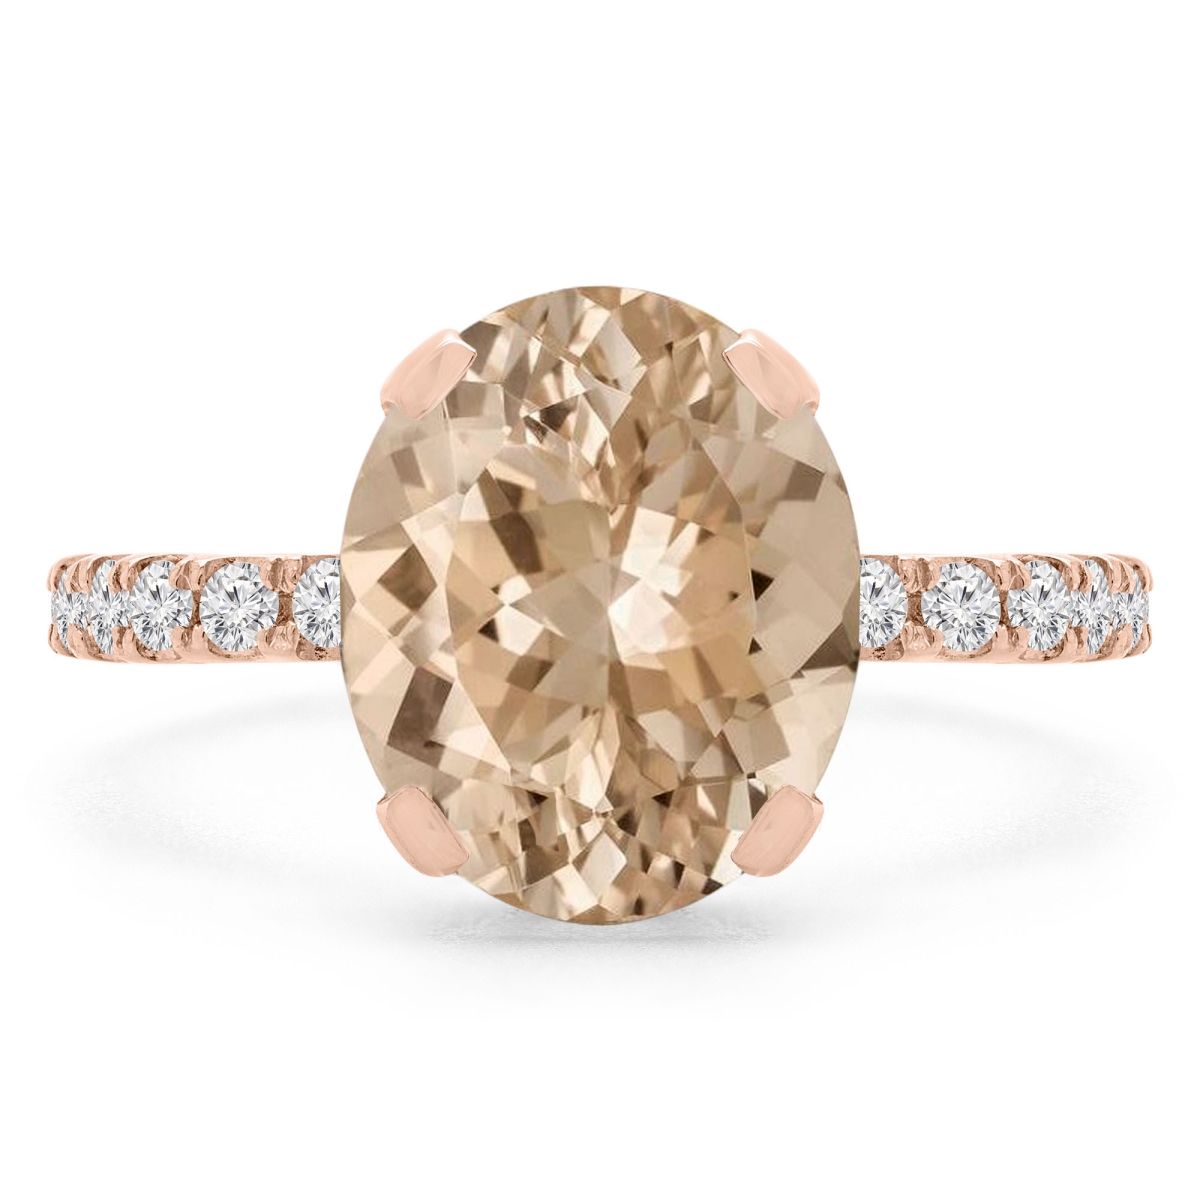 Picture of Majesty Diamonds MD190407-3.75 3.4 CTW Oval Pink Morganite Under Halo Engagement Ring in 14K Rose Gold - Size 3.75